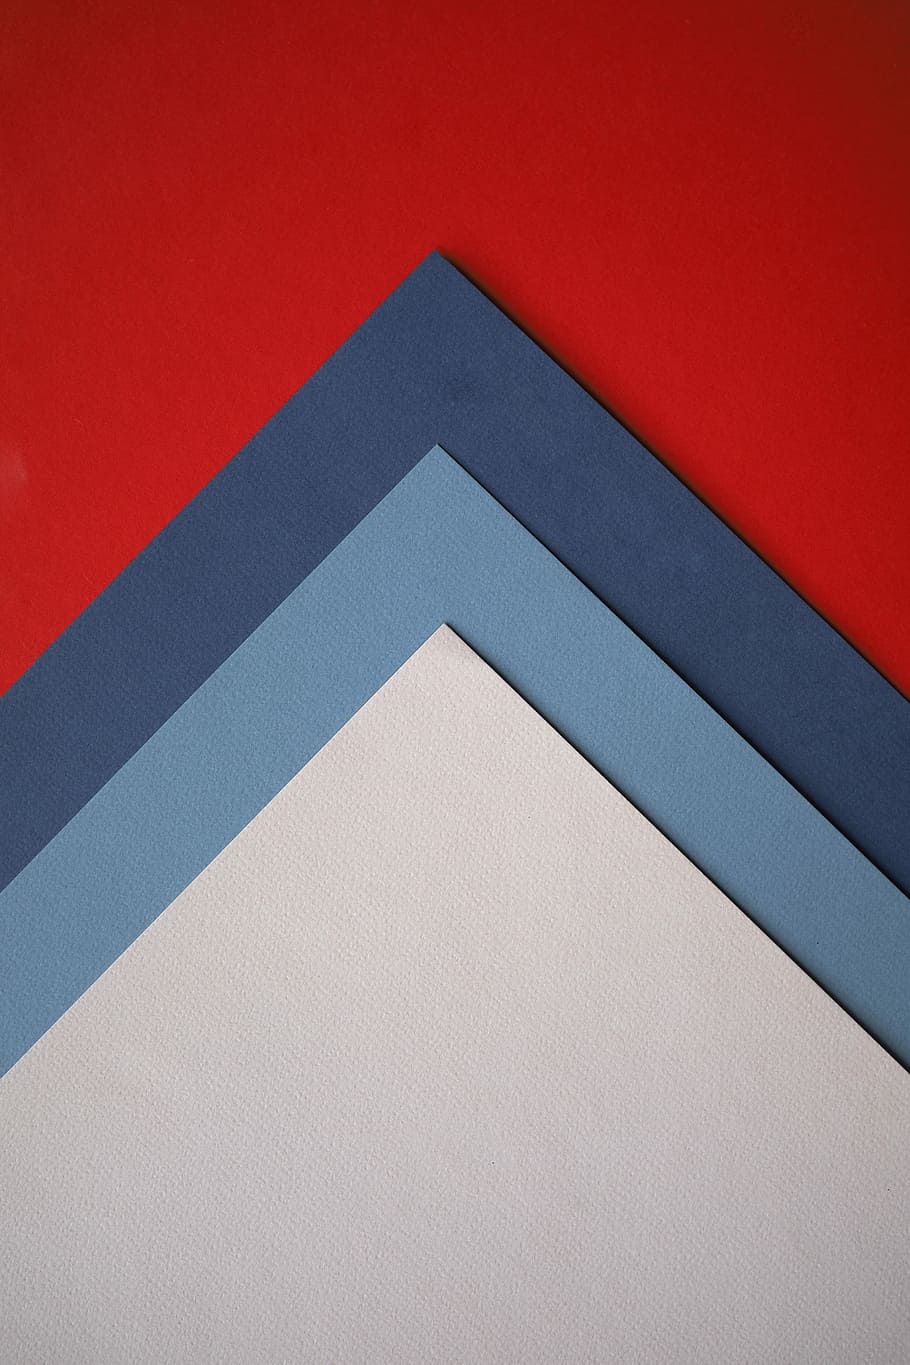 three white, blue, and black papers on red surface, color, triangle